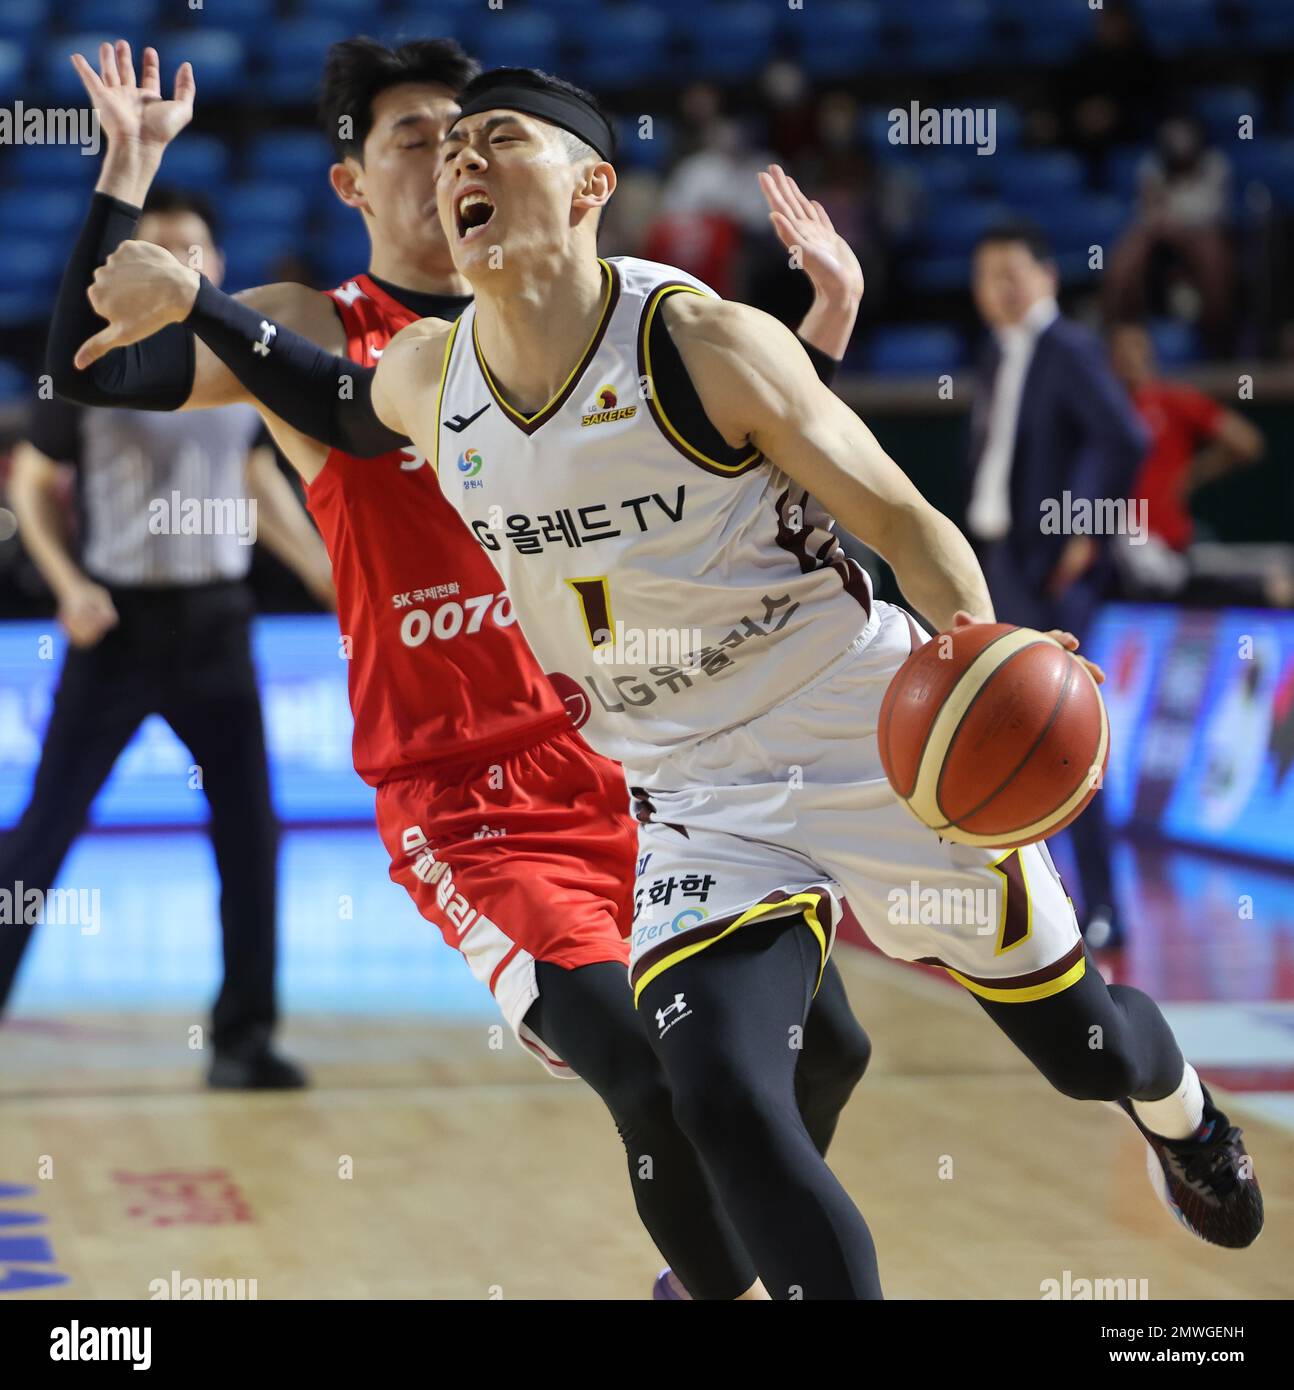 02nd Feb, 2023. Basketball: Changwon LG Sakers vs. Seoul SK Knights Lee Gwan-hee of the Changwon LG Sakers dribbles the ball during a Korean Basketball League game against the Seoul SK Knights at Jamsil Students' Gymnasium in Seoul on Feb. 1, 2023. Credit: Yonhap/Newcom/Alamy Live News Stock Photo